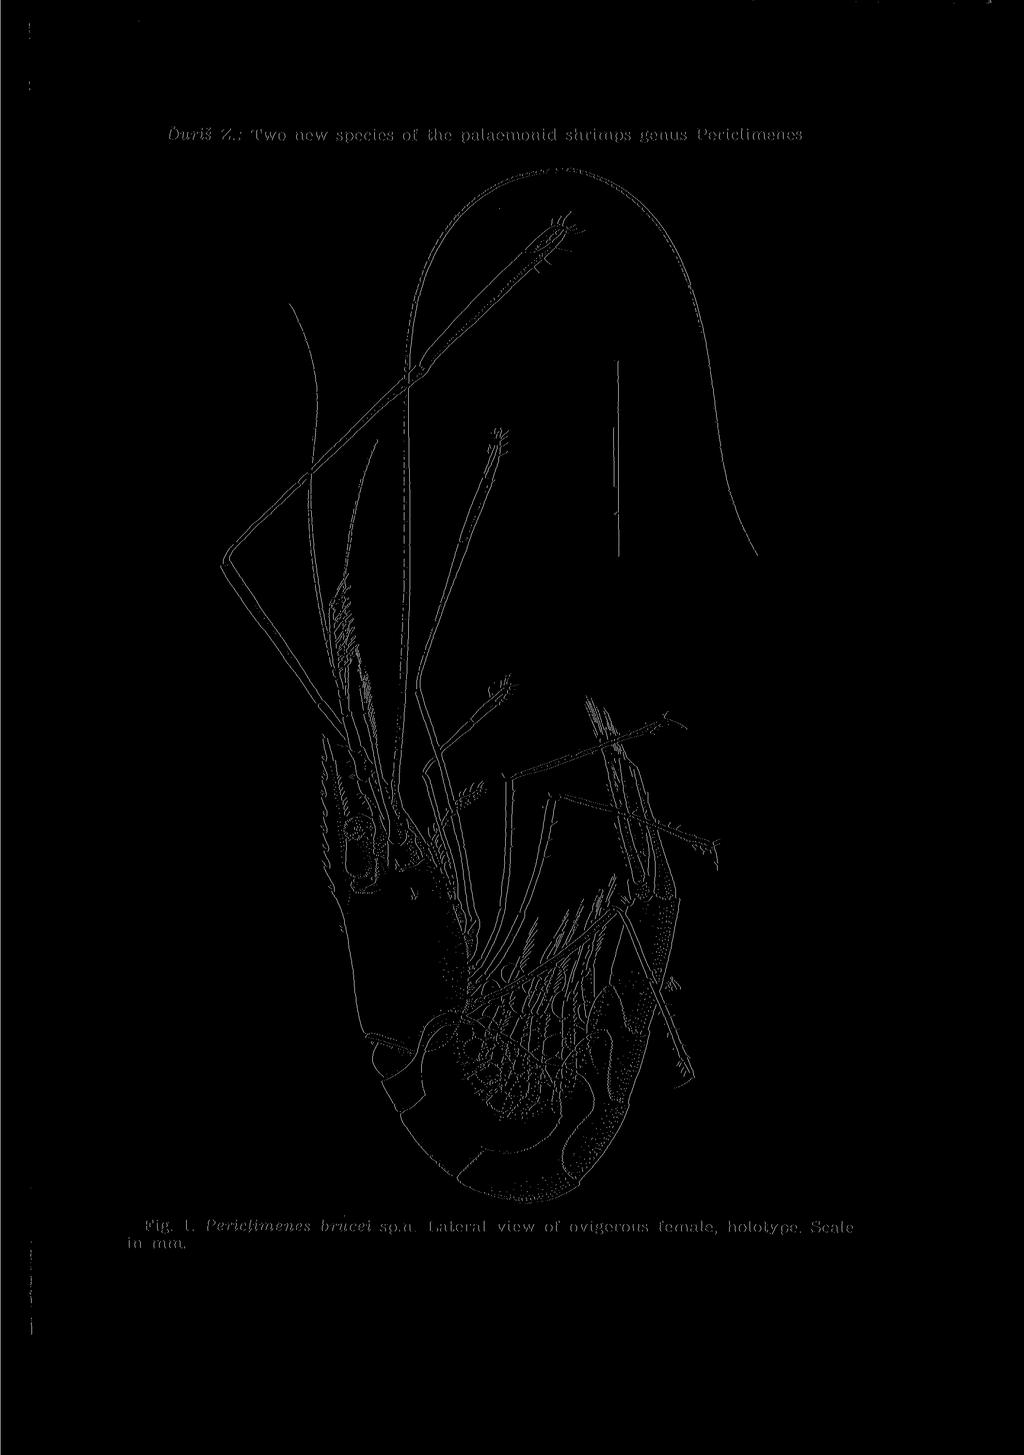 Duris Z.: Two new species of the palaemonid shrimps genus Periclimenes Fig. 1.